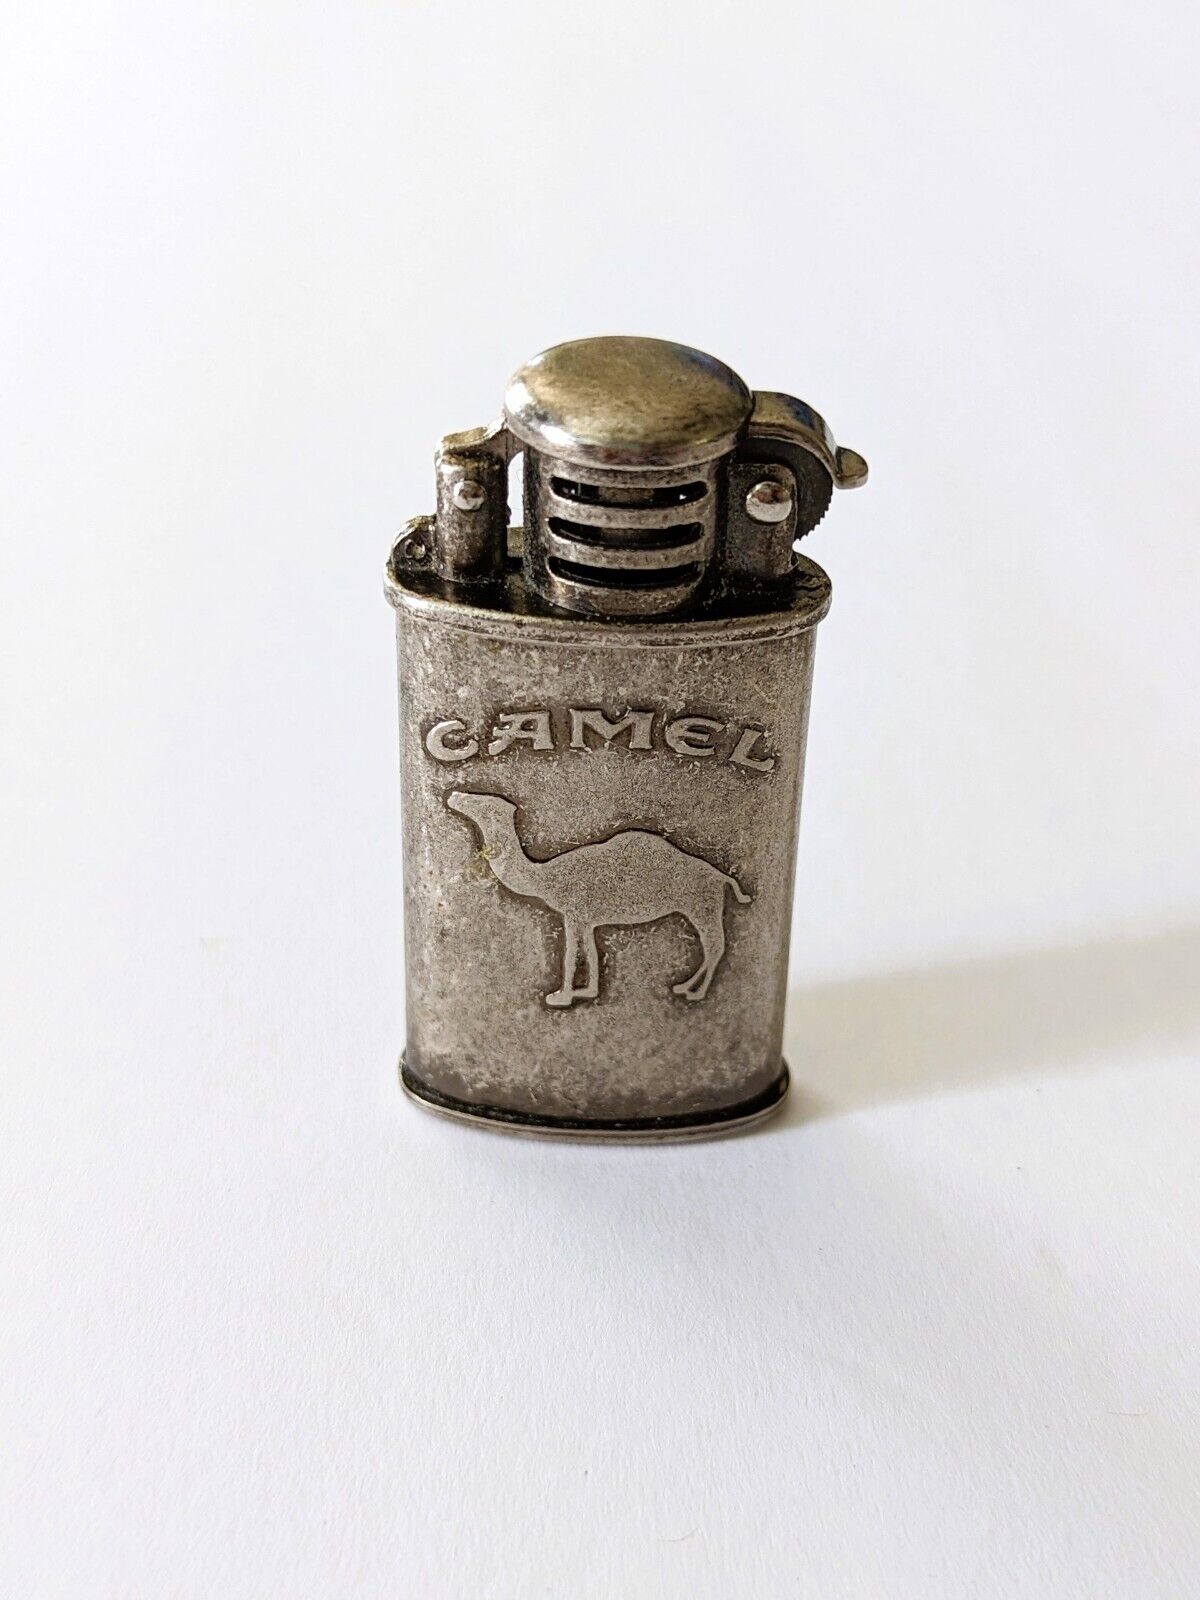 Vintage 90s Camel Pewter Finish Cigarette Lighter Tobacco Trench Style